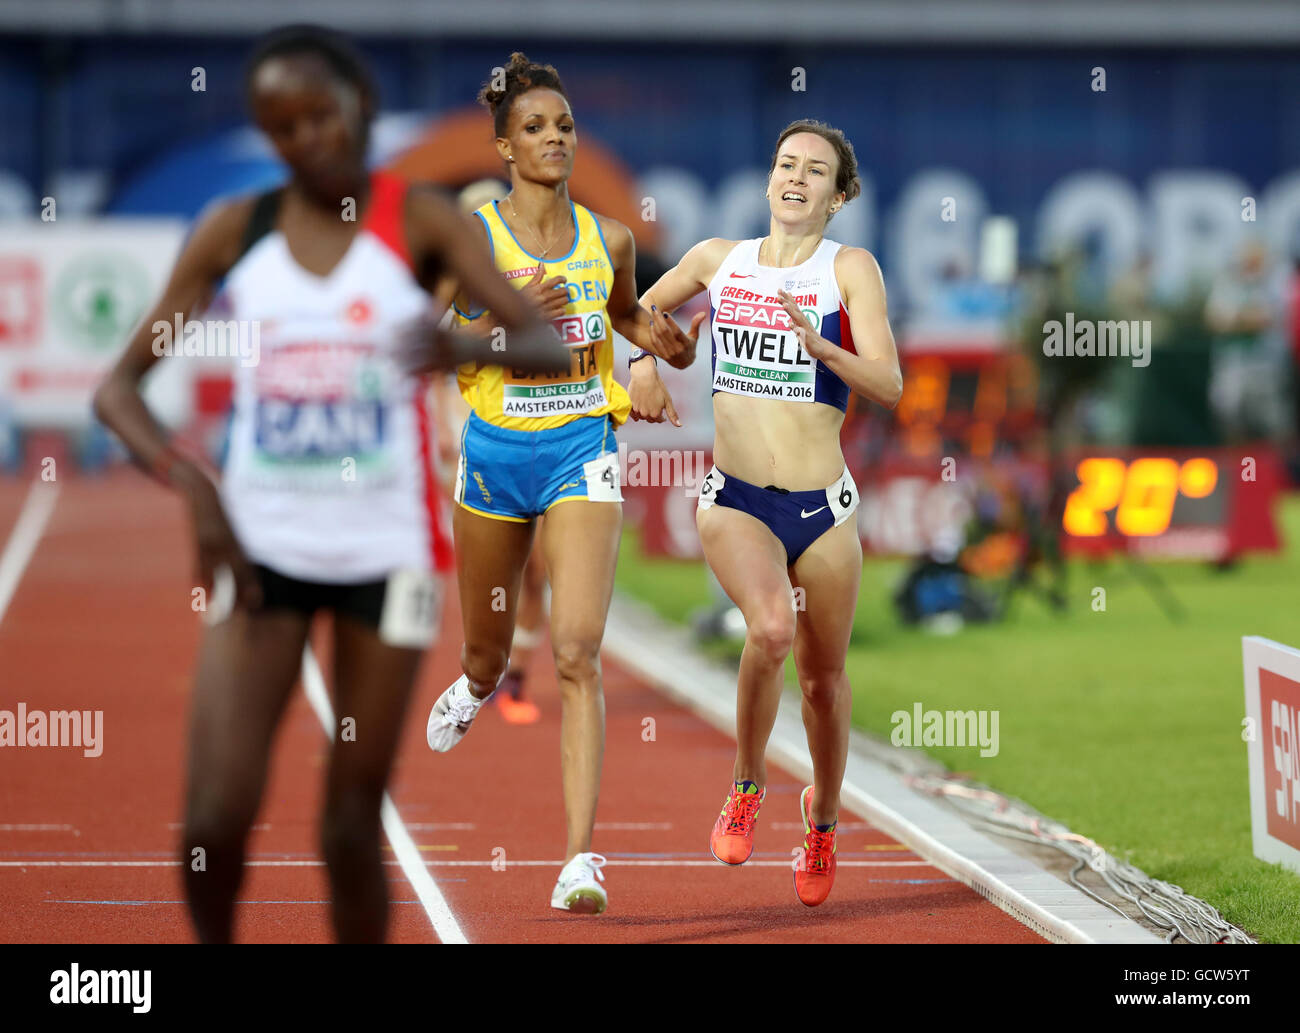 Great Britain's Steph Twell crosses the line to win a bronze medal in the Women's 5000m during day four of the 2016 European Athletic Championships at the Olympic Stadium, Amsterdam. Stock Photo